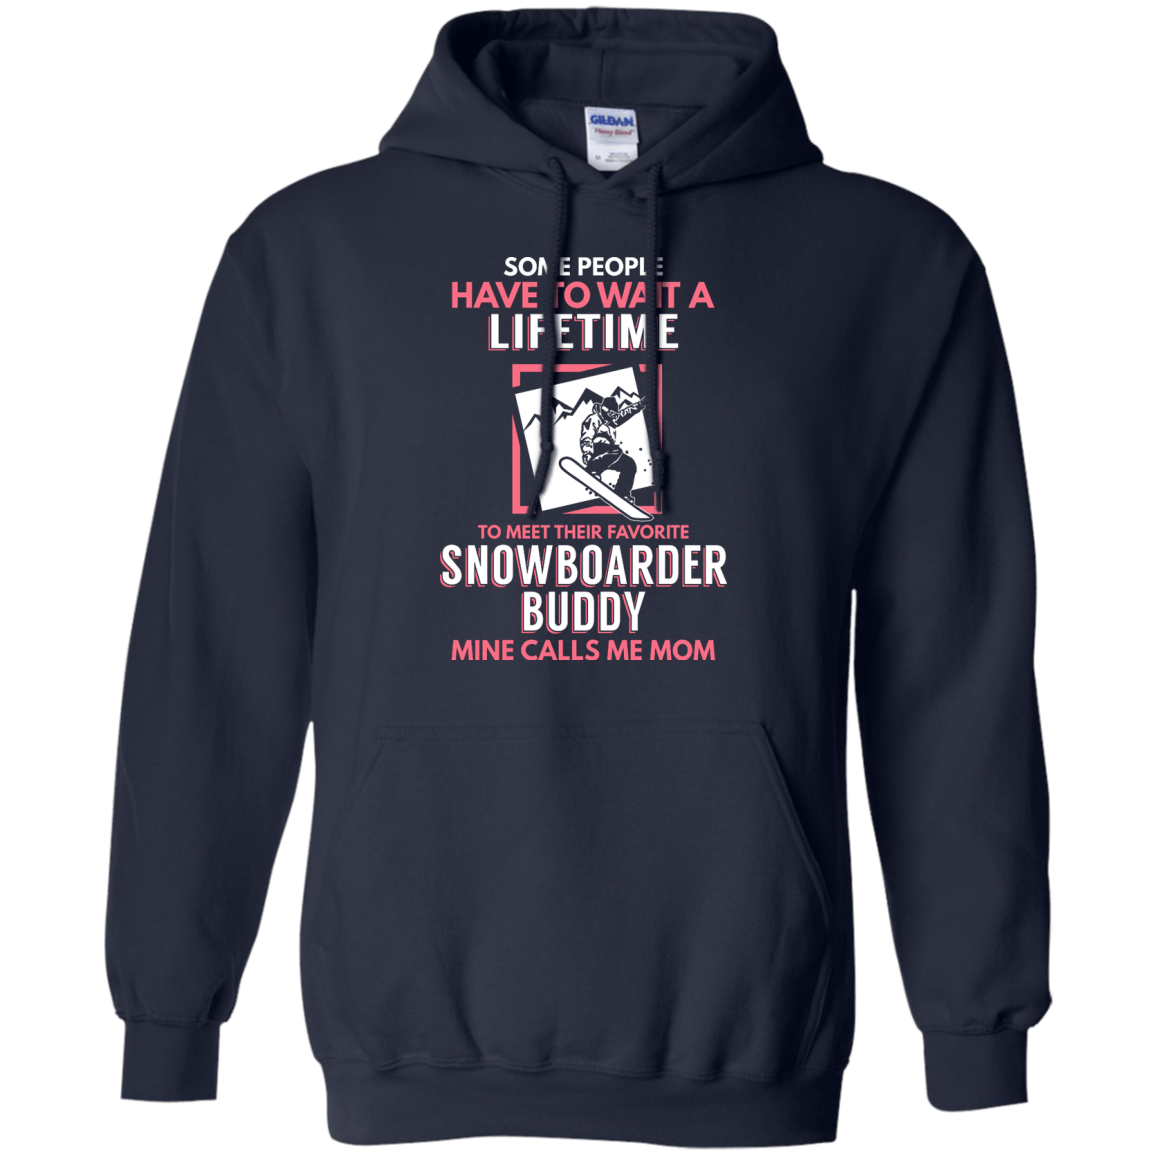 Some People Have To Wait A Lifetime To Meet Their Favorite Snowboarder Buddy Mine Calls Me Mom Hoodies - Powderaddicts